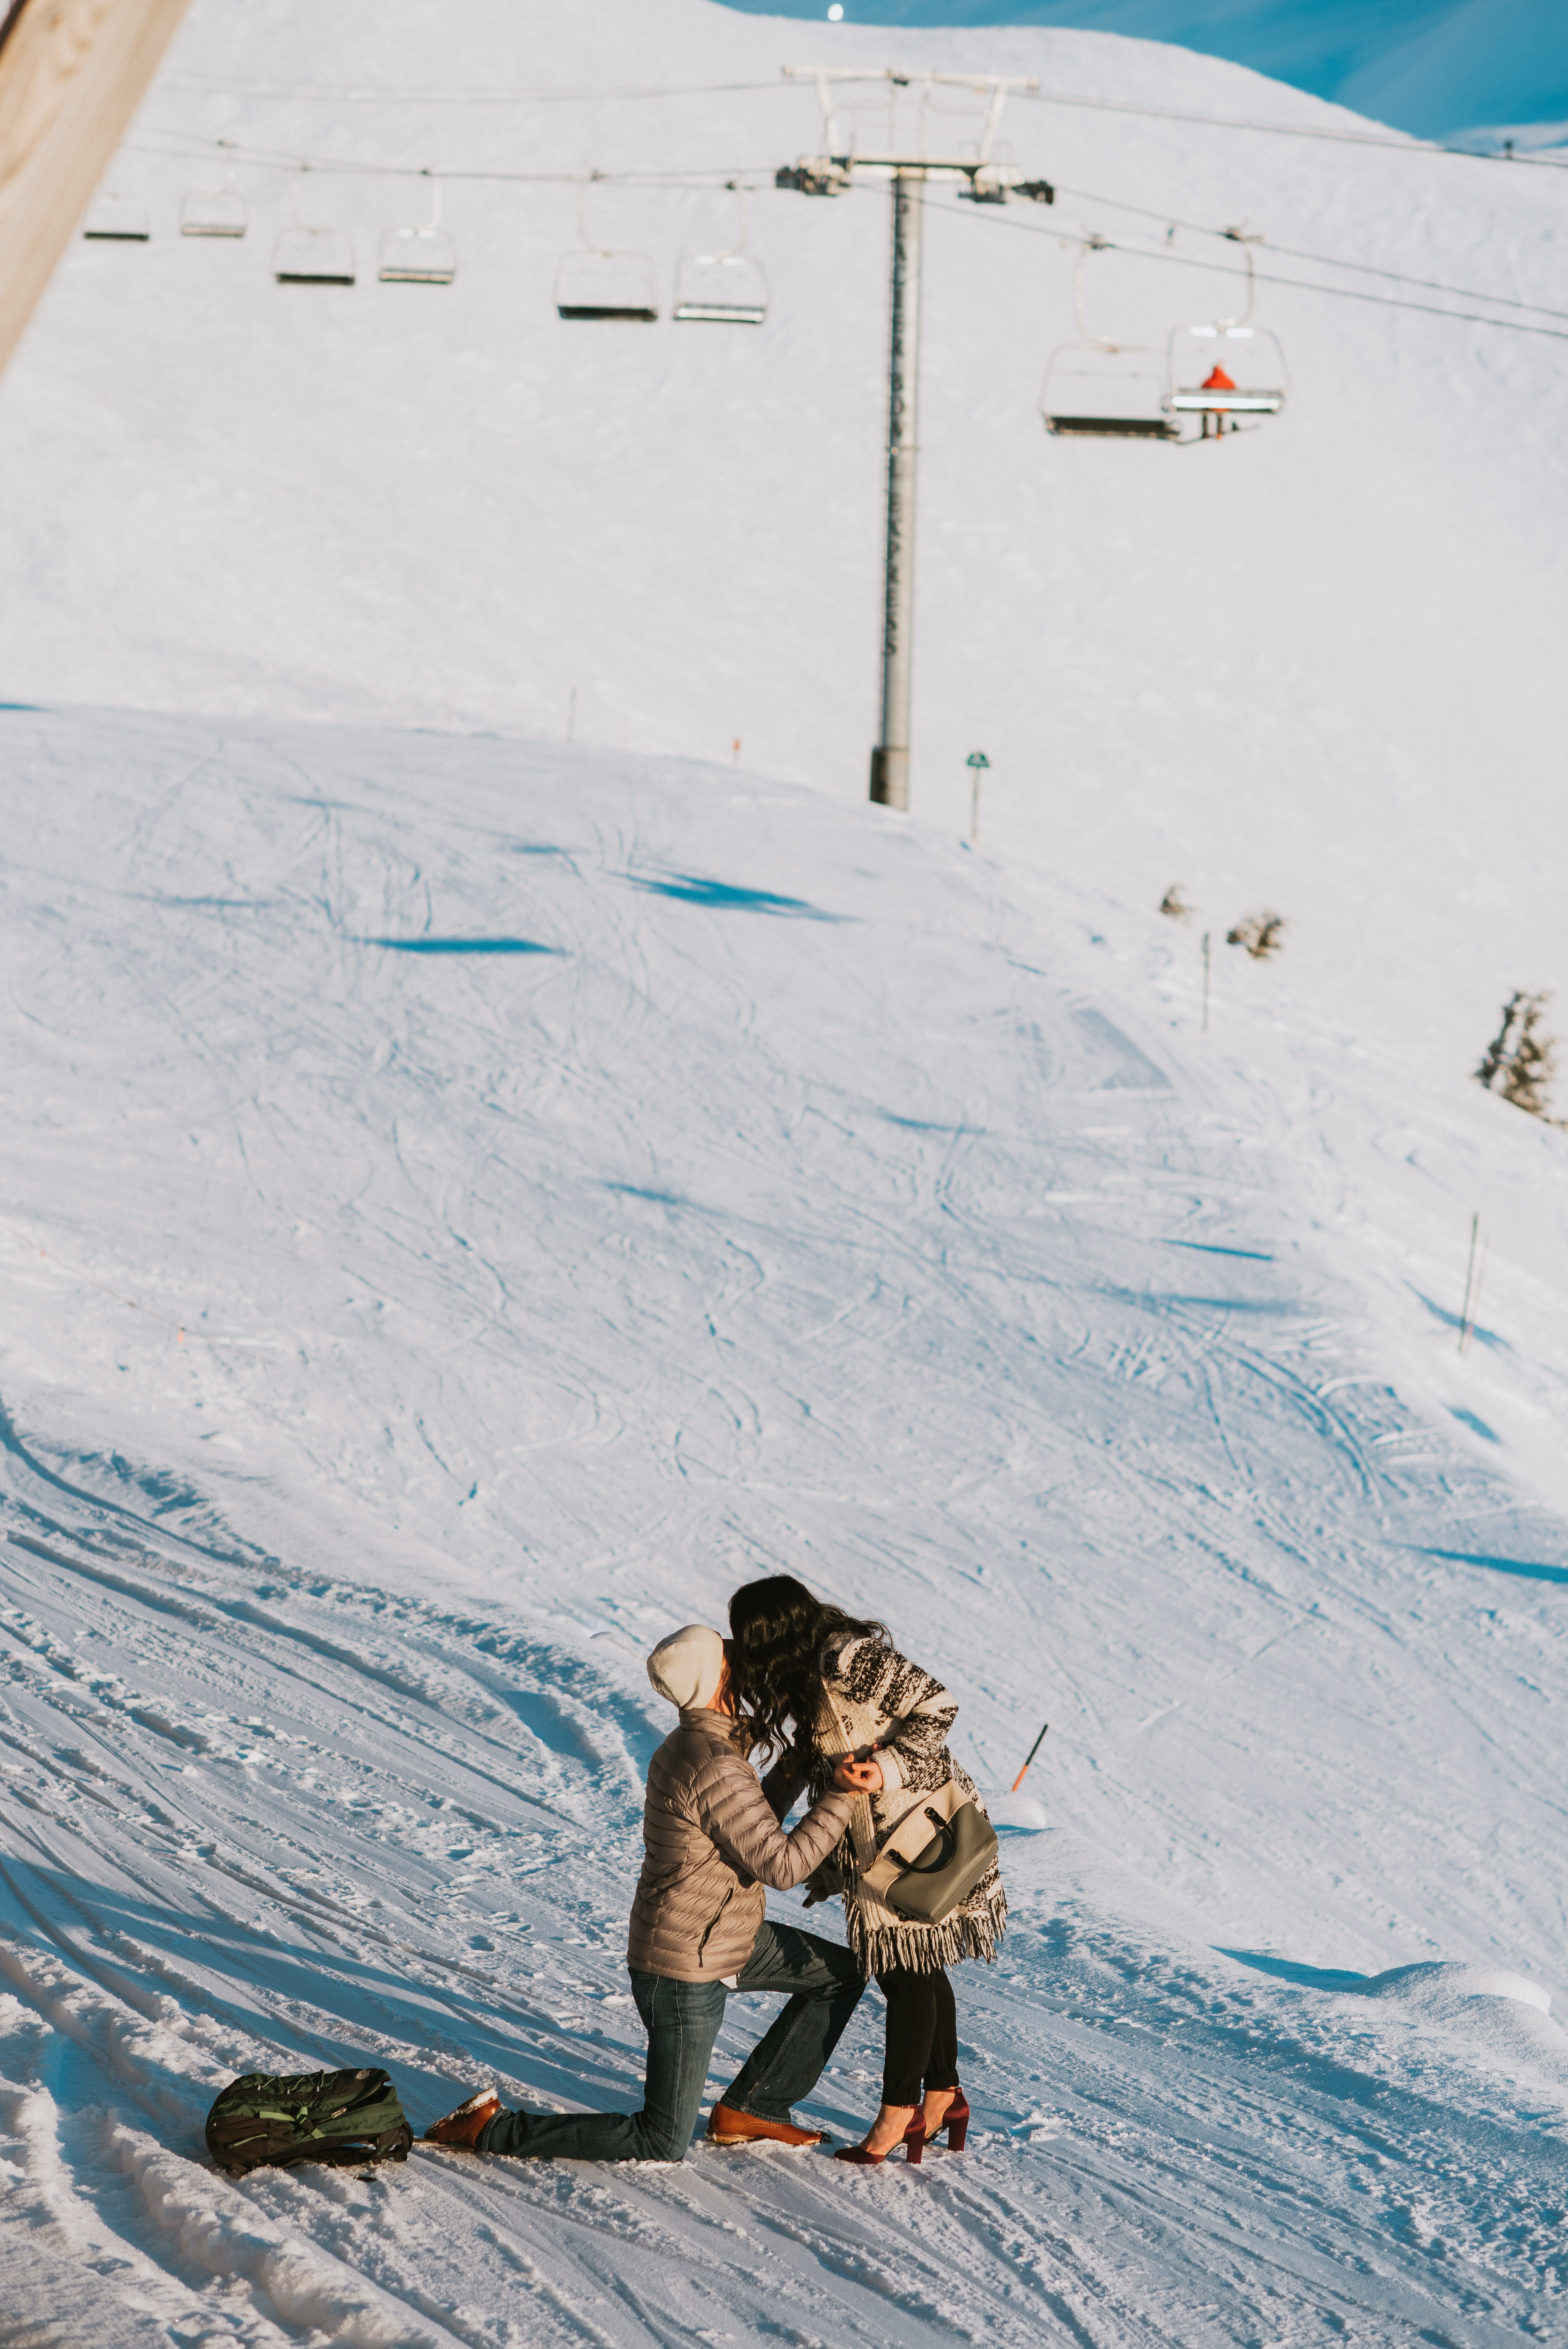 A man proposing to his girlfriend on the top of snow mountainside at alyeska resort, she said yes